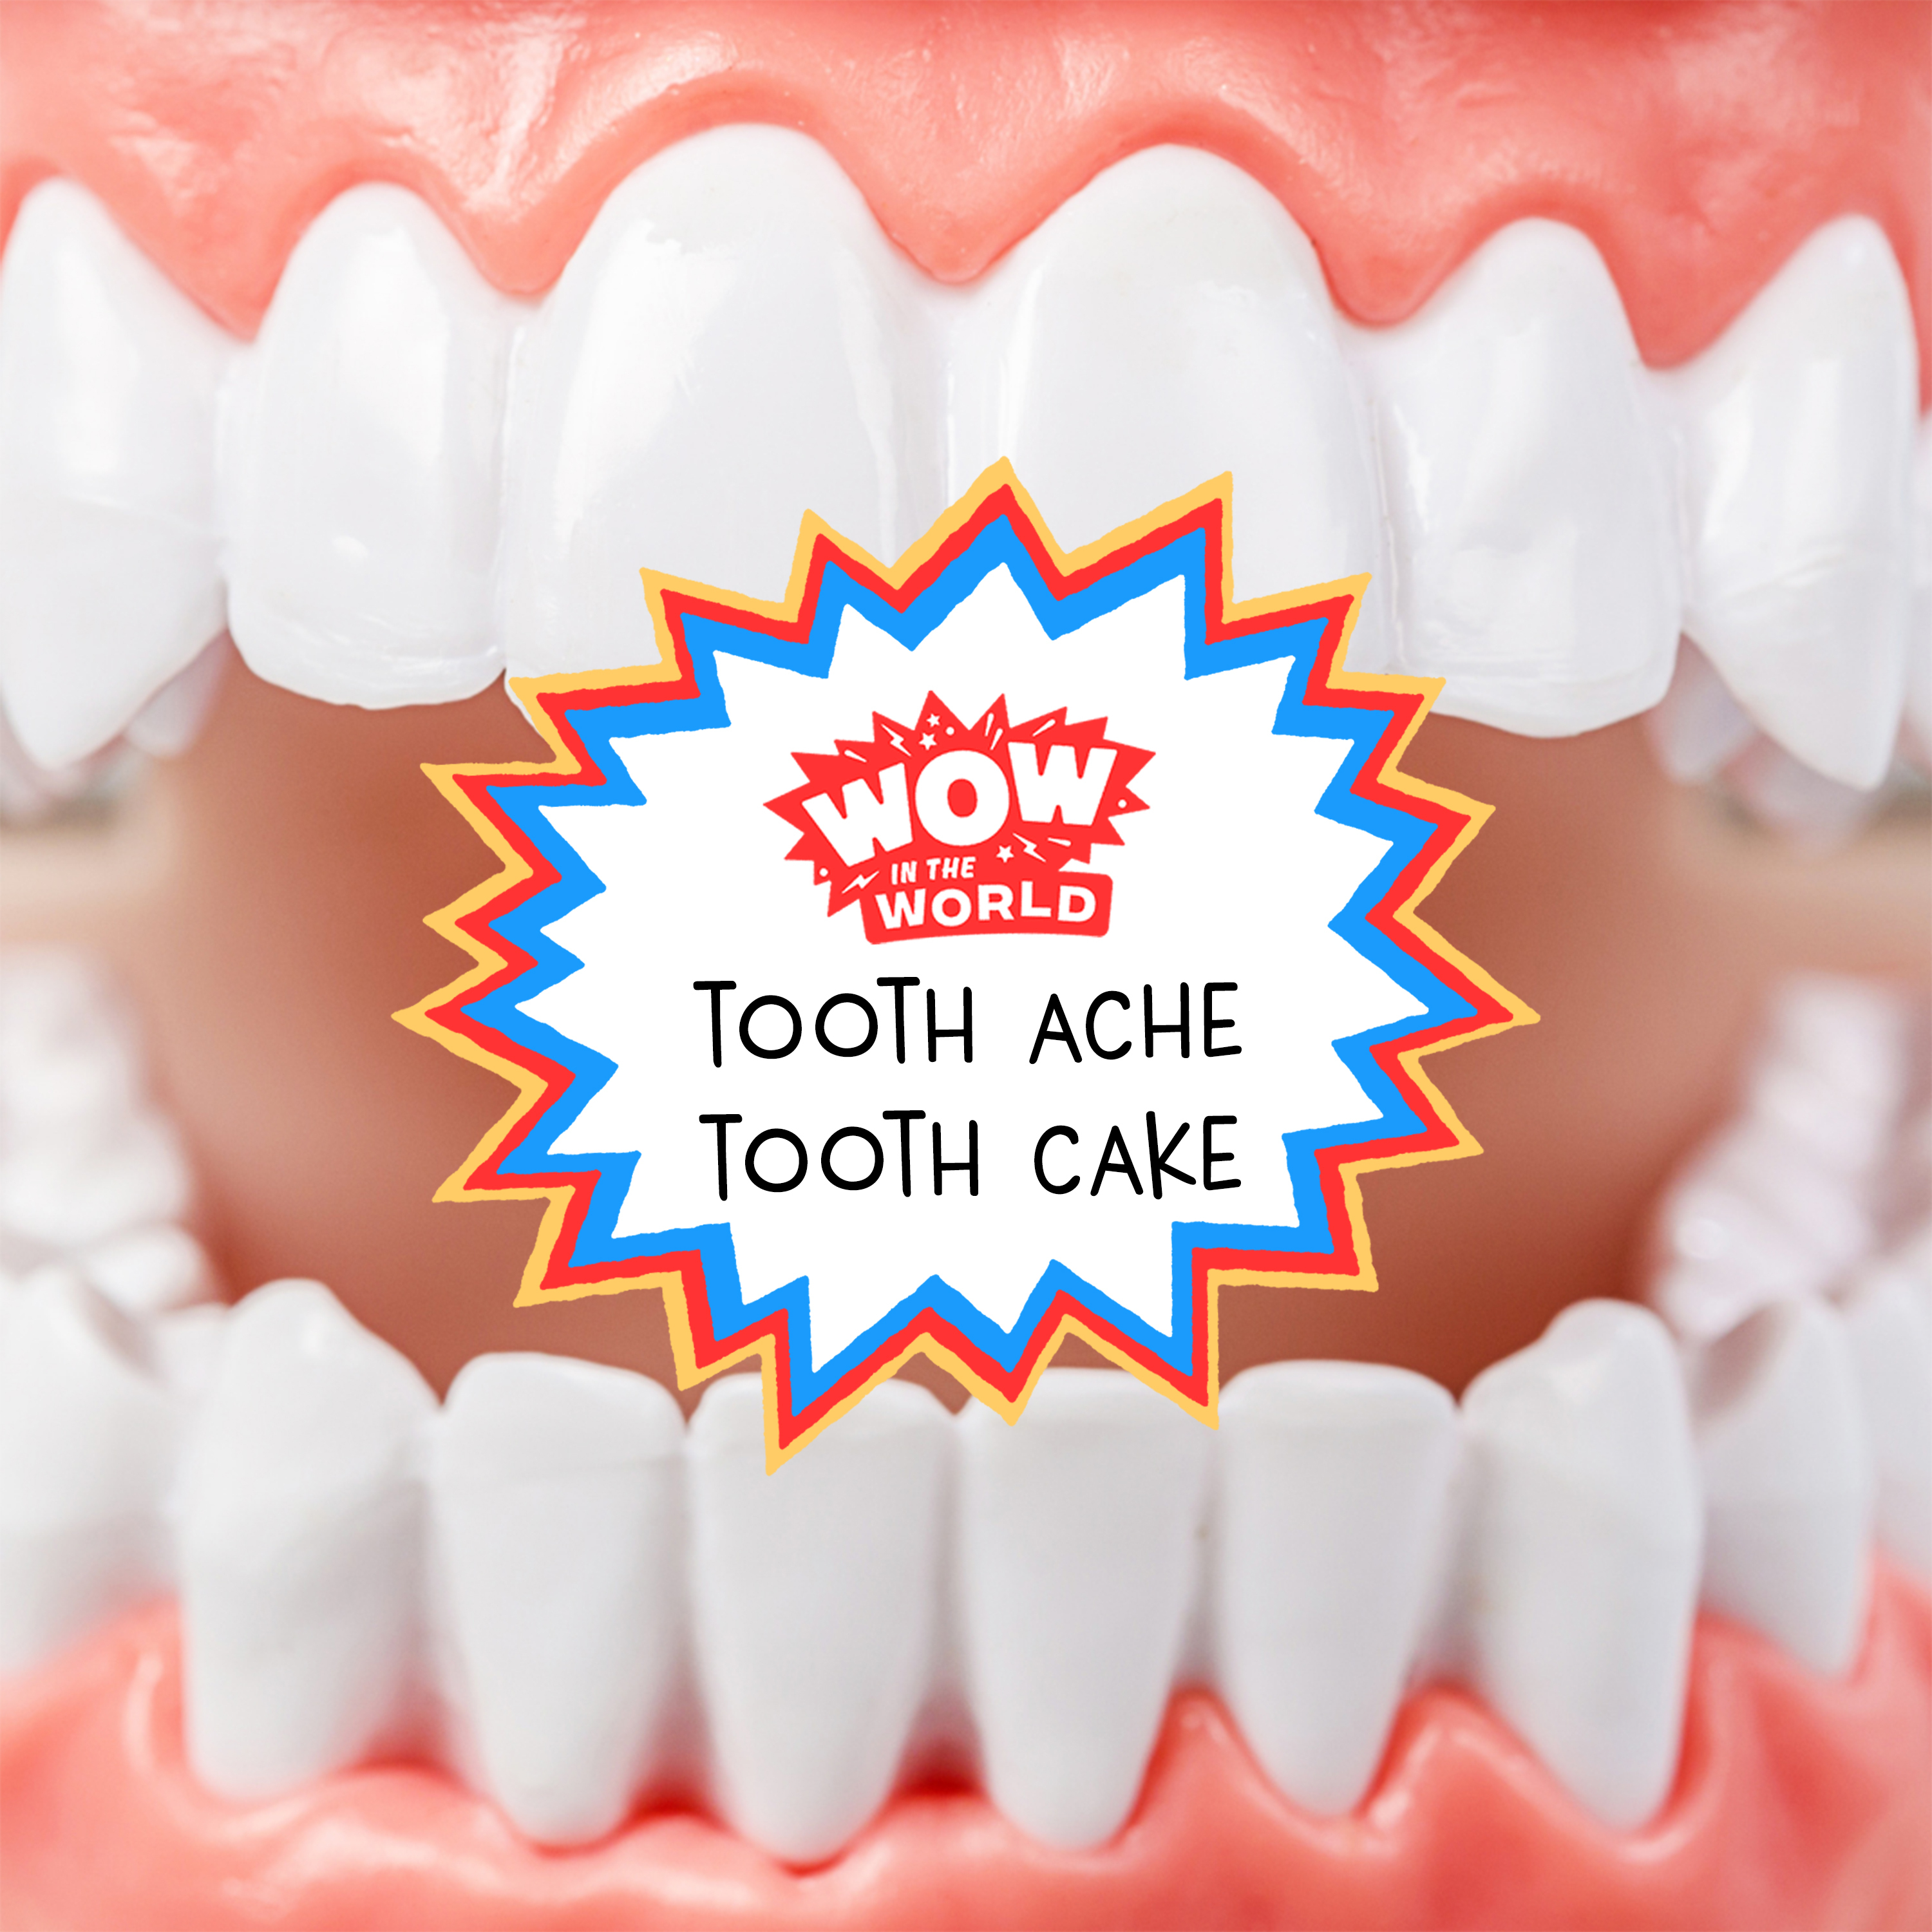 Tooth Ache Tooth Cake (2/6/23)